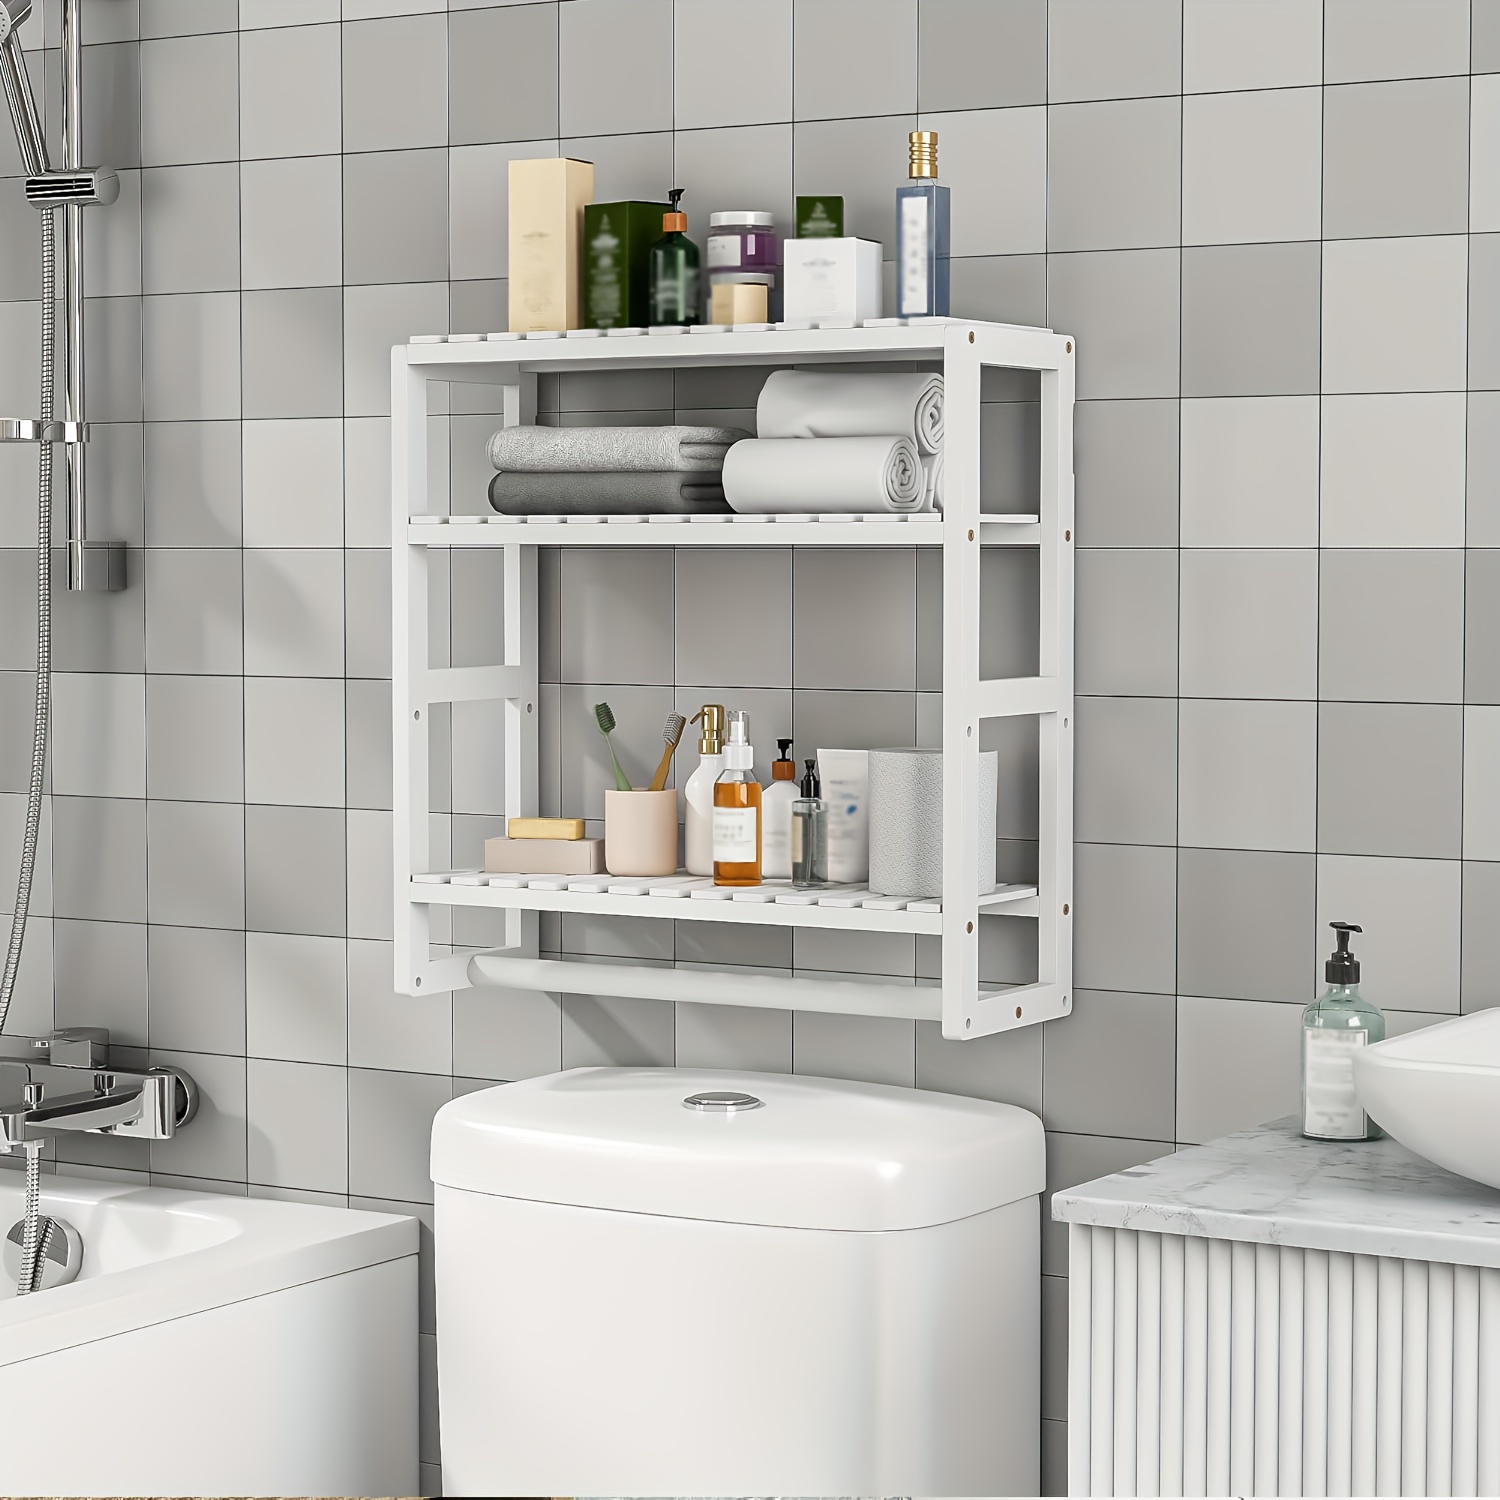 1pc bathroom storage shelves adjustable 3 tiers storage rack over the toilet storage floating shelves for wall mounted with hanging rod bathroom accessories home organization and storage supplies bathroom decor